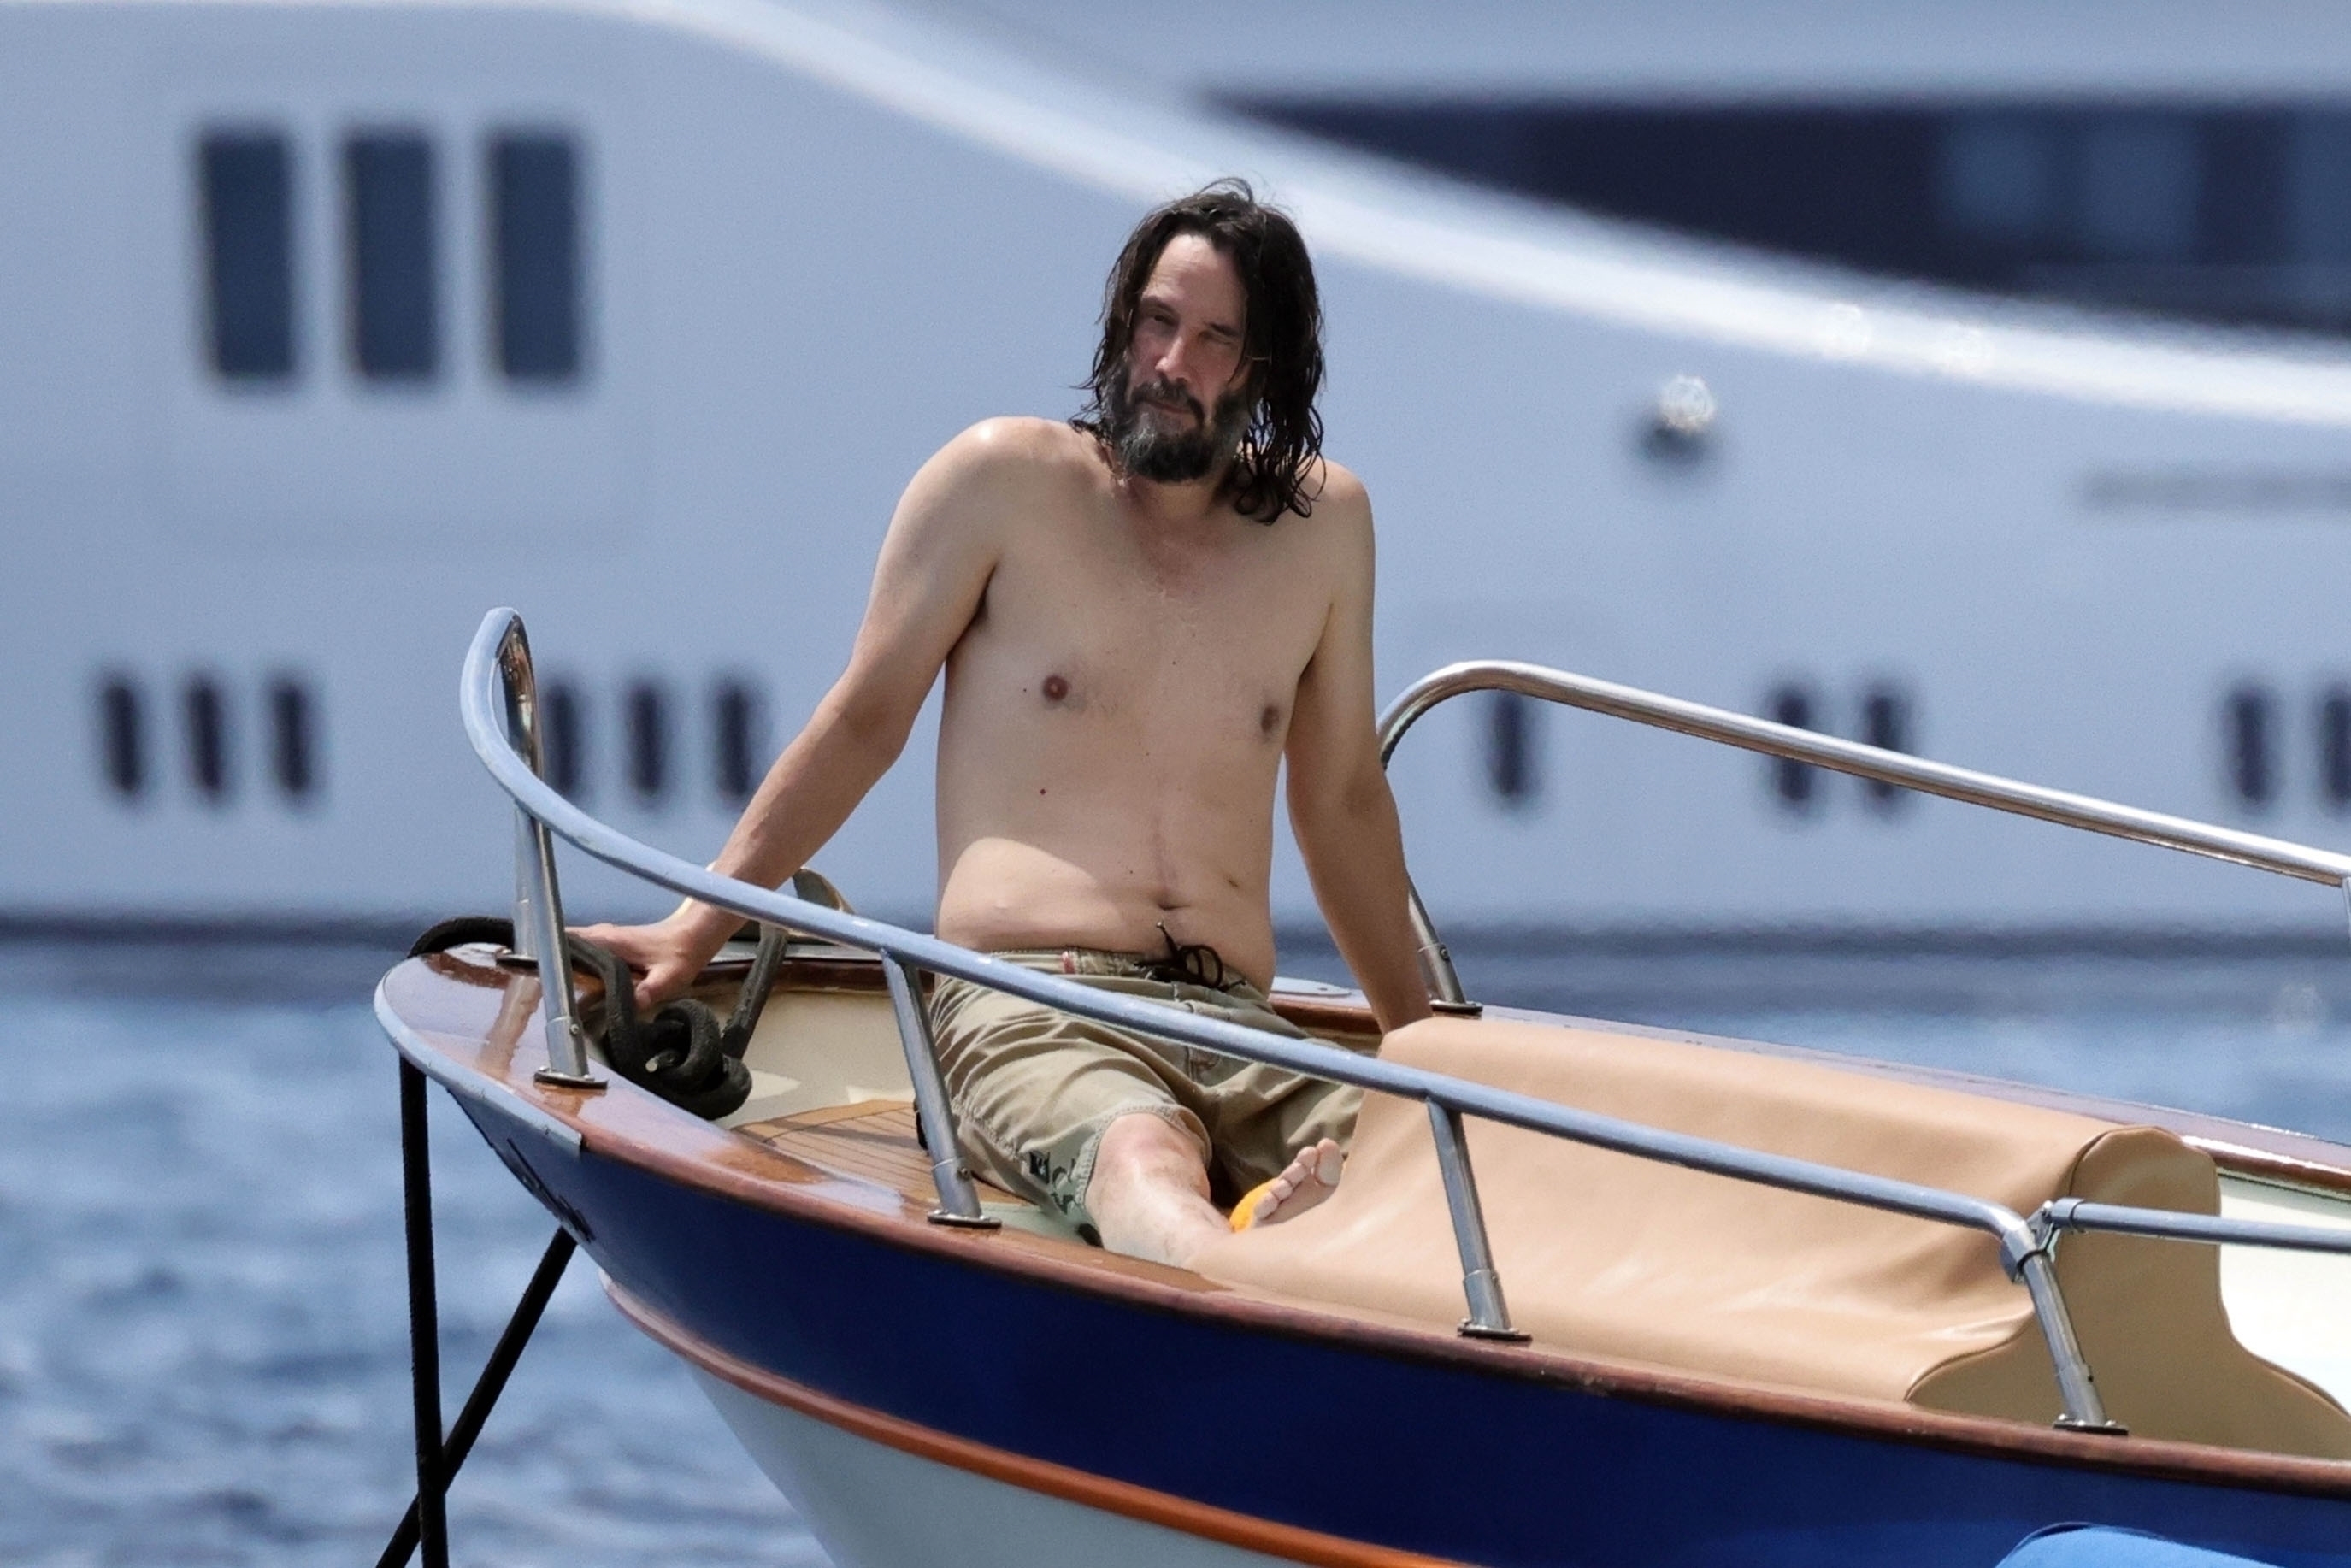 <p>Keanu Reeves relaxed on a boat off the coast of Capri in Italy during a European holiday with his sister, Kim (not pictured), on Aug 1.</p><p>MORE: <a href="https://www.msn.com/en-us/community/channel/vid-kwt2e0544658wubk9hsb0rpvnfkttmu3tuj7uq3i4wuywgbakeva?item=flights%3Aprg-tipsubsc-v1a&ocid=social-peregrine&cvid=333aa5de5a654aa7a98a6930005e8f60&ei=2" rel="noreferrer noopener">Follow Wonderwall on MSN for more fun celebrity & entertainment photo galleries and content</a></p>